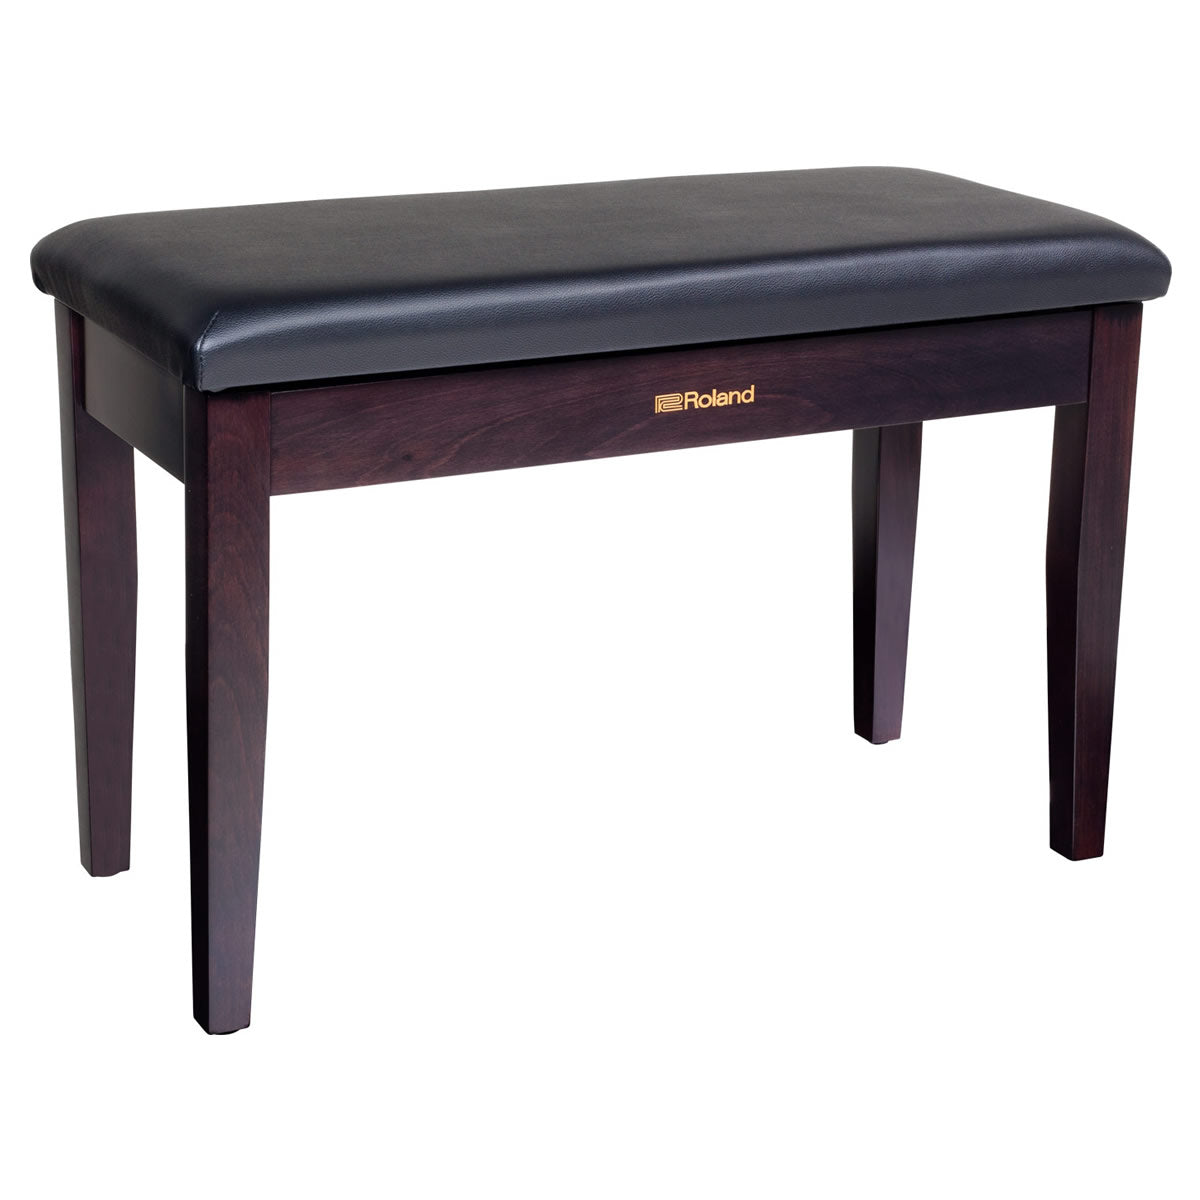 Roland RPB-D100RW Duet Piano Bench with Storage - Rosewood View 1